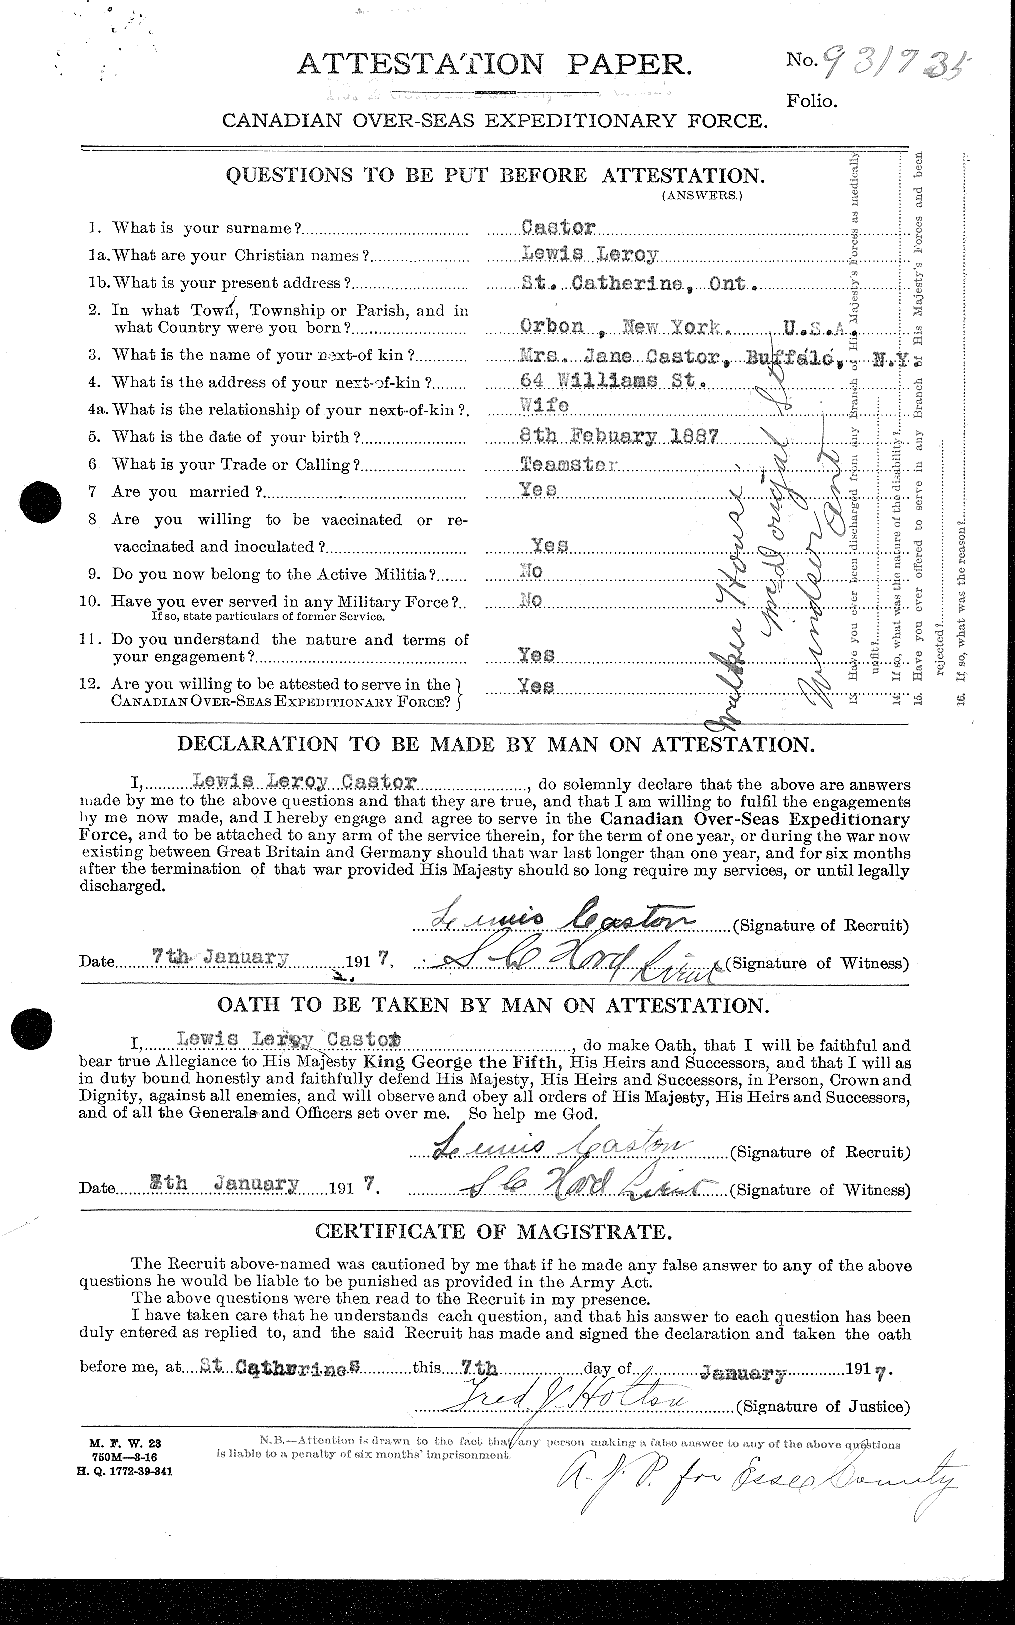 Personnel Records of the First World War - CEF 007292a